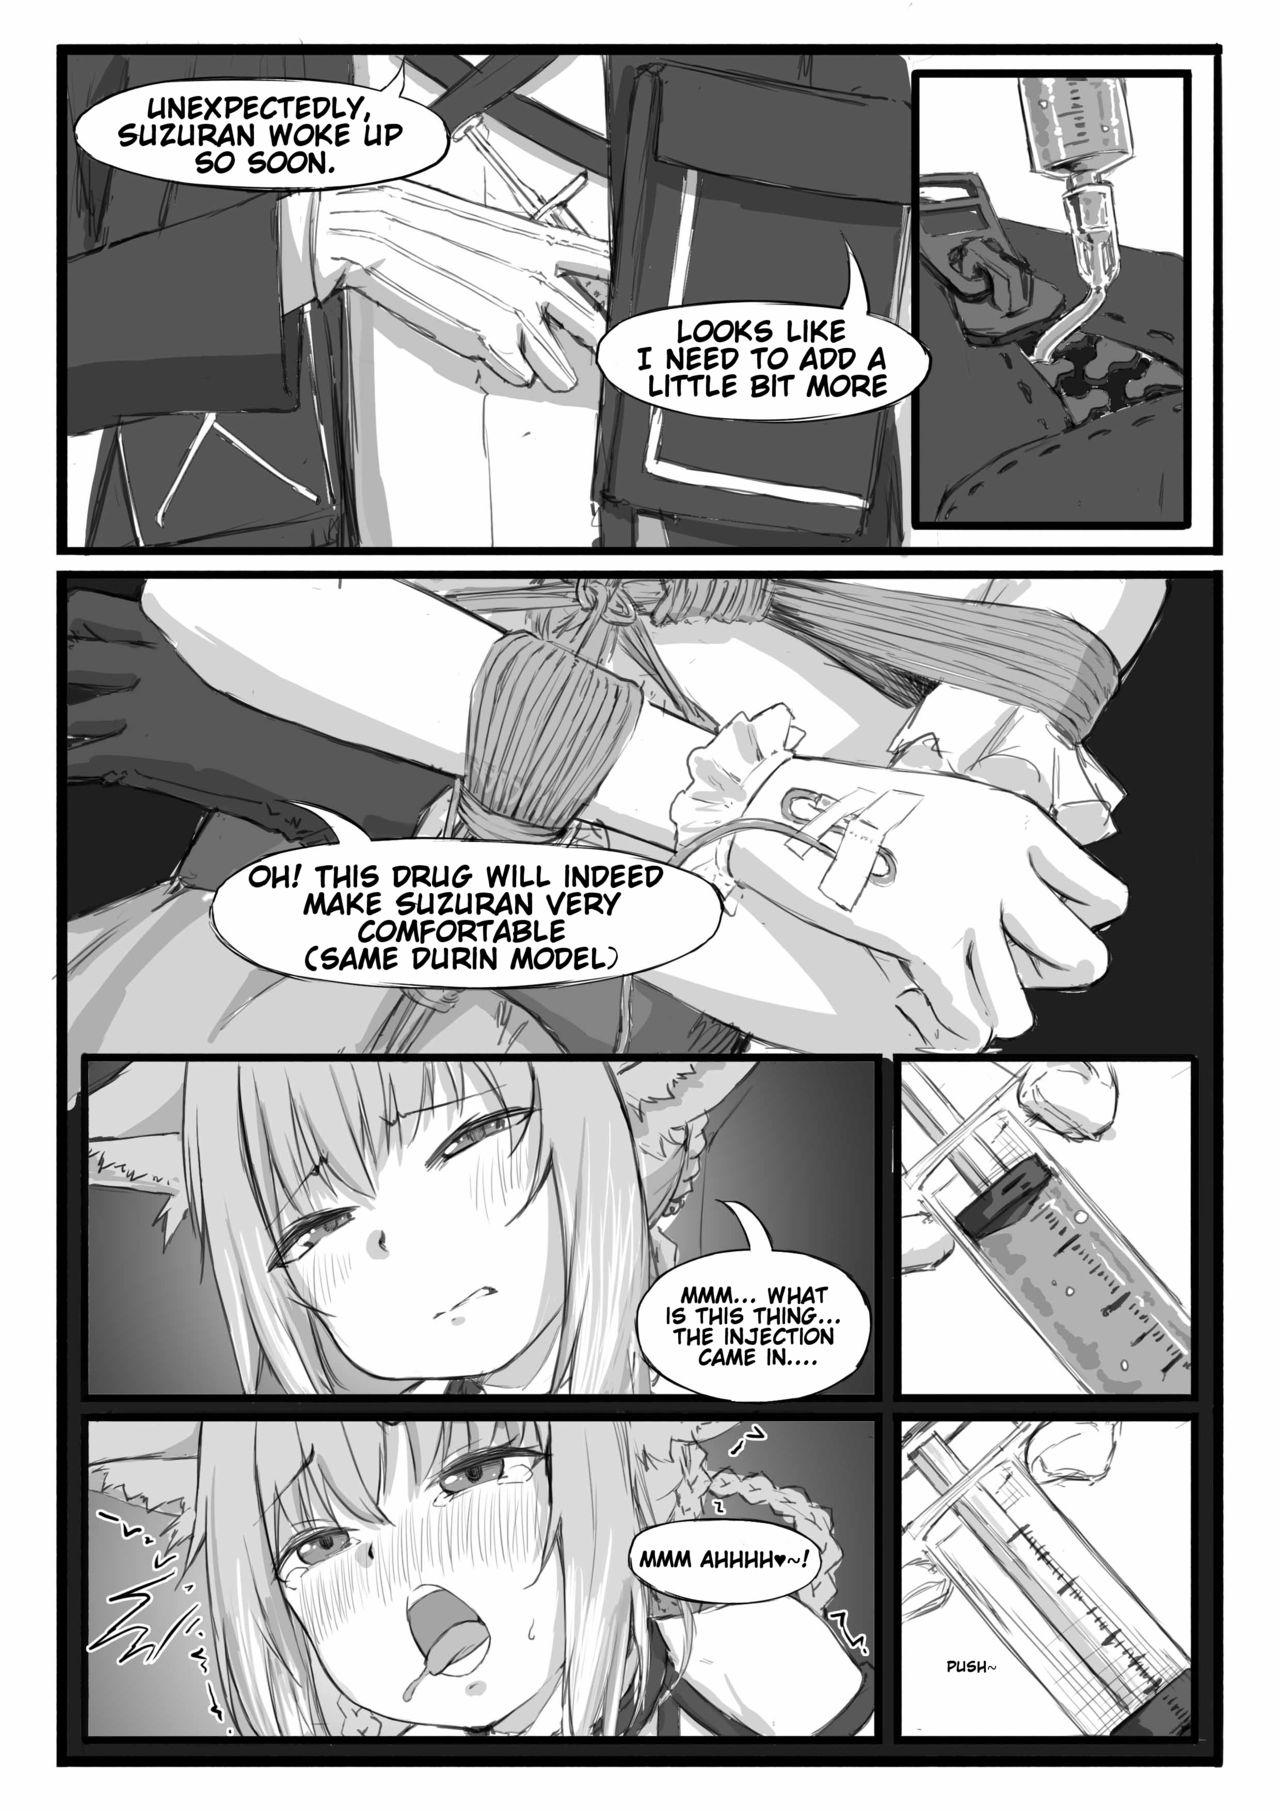 Older Suzuran's Solo Mission - Arknights Monstercock - Page 11